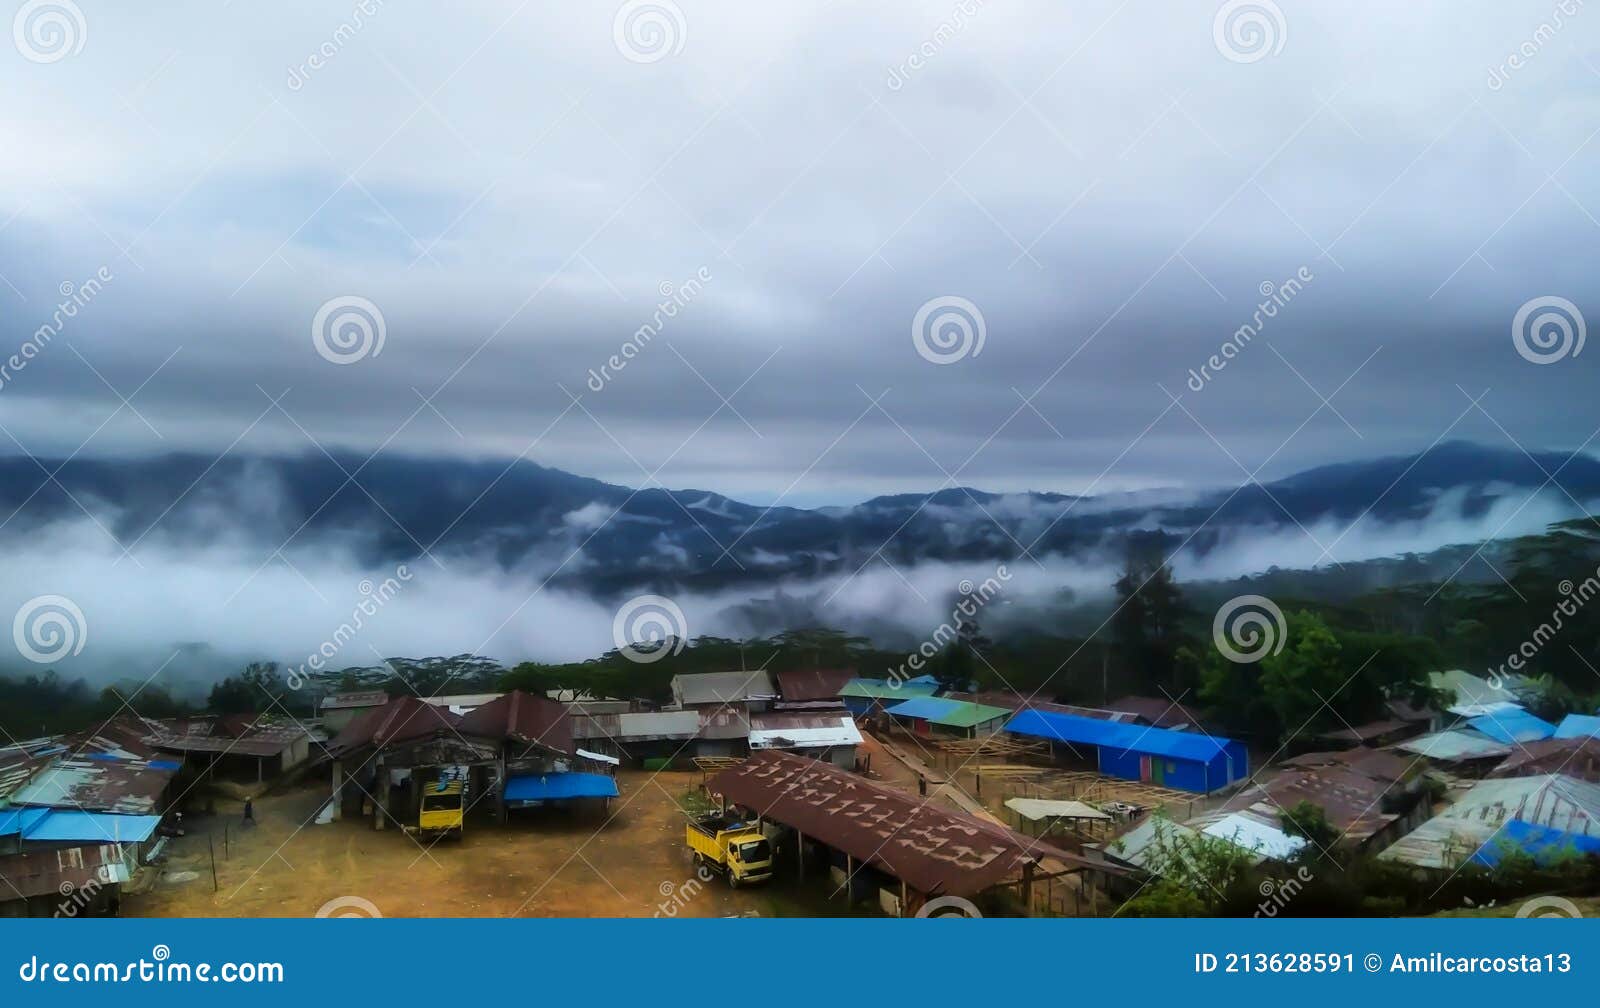 village above the clouds in letefoho, timor-leste.